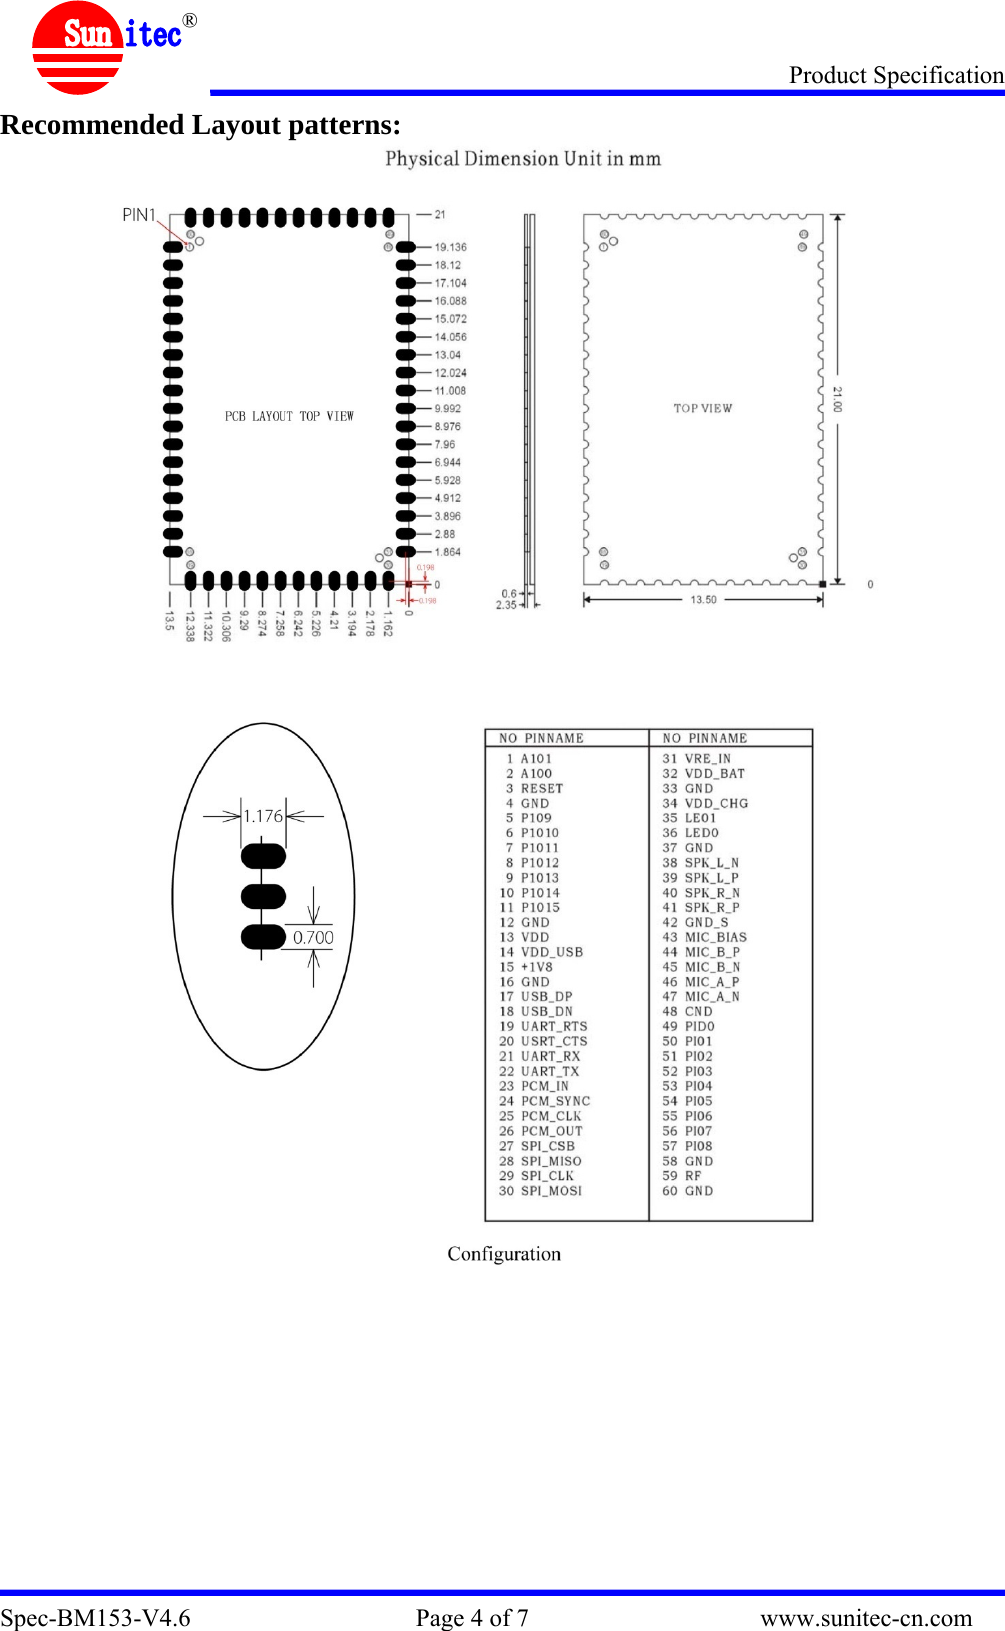 Product Specification Spec-BM153-V4.6                                    Page 4 of 7                                     www.sunitec-cn.com  ® Recommended Layout patterns:     